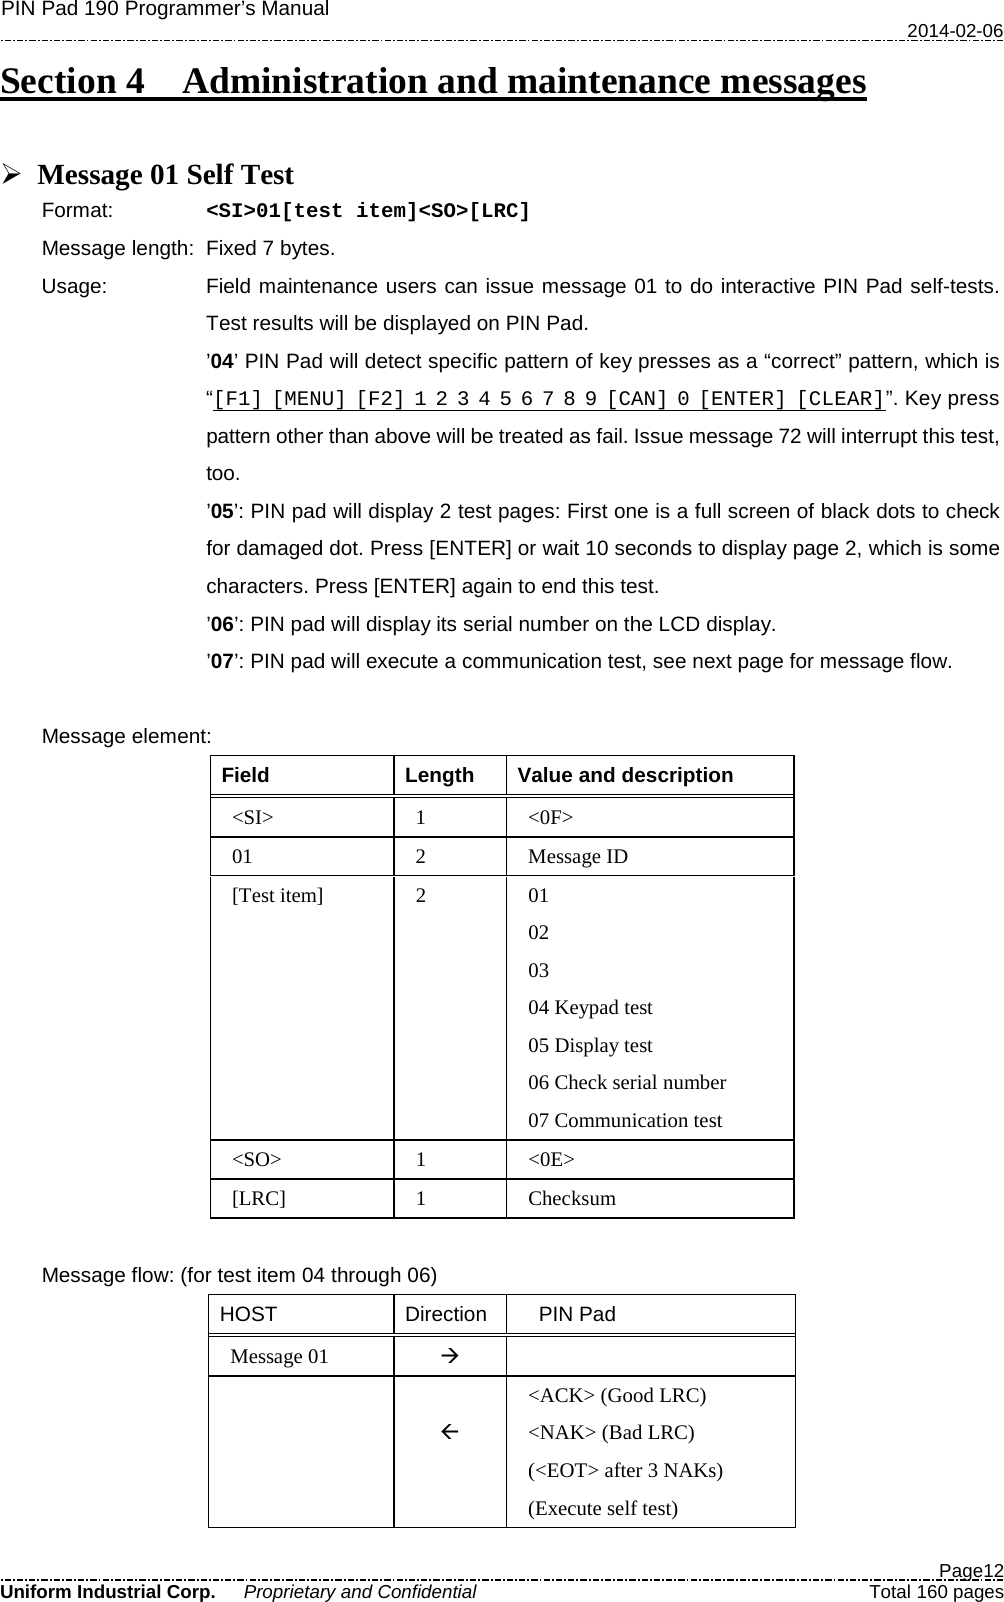 PIN Pad 190 Programmer’s Manual   2014-02-06  Page12 Uniform Industrial Corp. Proprietary and Confidential  Total 160 pages Section 4   Administration and maintenance messages   Message 01 Self Test Format:   &lt;SI&gt;01[test item]&lt;SO&gt;[LRC] Message length: Fixed 7 bytes. Usage:   Field maintenance users can issue message 01 to do interactive PIN Pad self-tests. Test results will be displayed on PIN Pad.   ’04’ PIN Pad will detect specific pattern of key presses as a “correct” pattern, which is “[F1] [MENU] [F2] 1 2 3 4 5 6 7 8 9 [CAN] 0 [ENTER] [CLEAR]”. Key press pattern other than above will be treated as fail. Issue message 72 will interrupt this test, too. ’05’: PIN pad will display 2 test pages: First one is a full screen of black dots to check for damaged dot. Press [ENTER] or wait 10 seconds to display page 2, which is some characters. Press [ENTER] again to end this test. ’06’: PIN pad will display its serial number on the LCD display. ’07’: PIN pad will execute a communication test, see next page for message flow.  Message element: Field Length  Value and description &lt;SI&gt;  1  &lt;0F&gt; 01  2  Message ID [Test item]  2  01 02 03   04 Keypad test 05 Display test 06 Check serial number 07 Communication test &lt;SO&gt;  1  &lt;0E&gt; [LRC]  1  Checksum  Message flow: (for test item 04 through 06) HOST Direction   PIN Pad Message 01     &lt;ACK&gt; (Good LRC) &lt;NAK&gt; (Bad LRC) (&lt;EOT&gt; after 3 NAKs)     (Execute self test) 